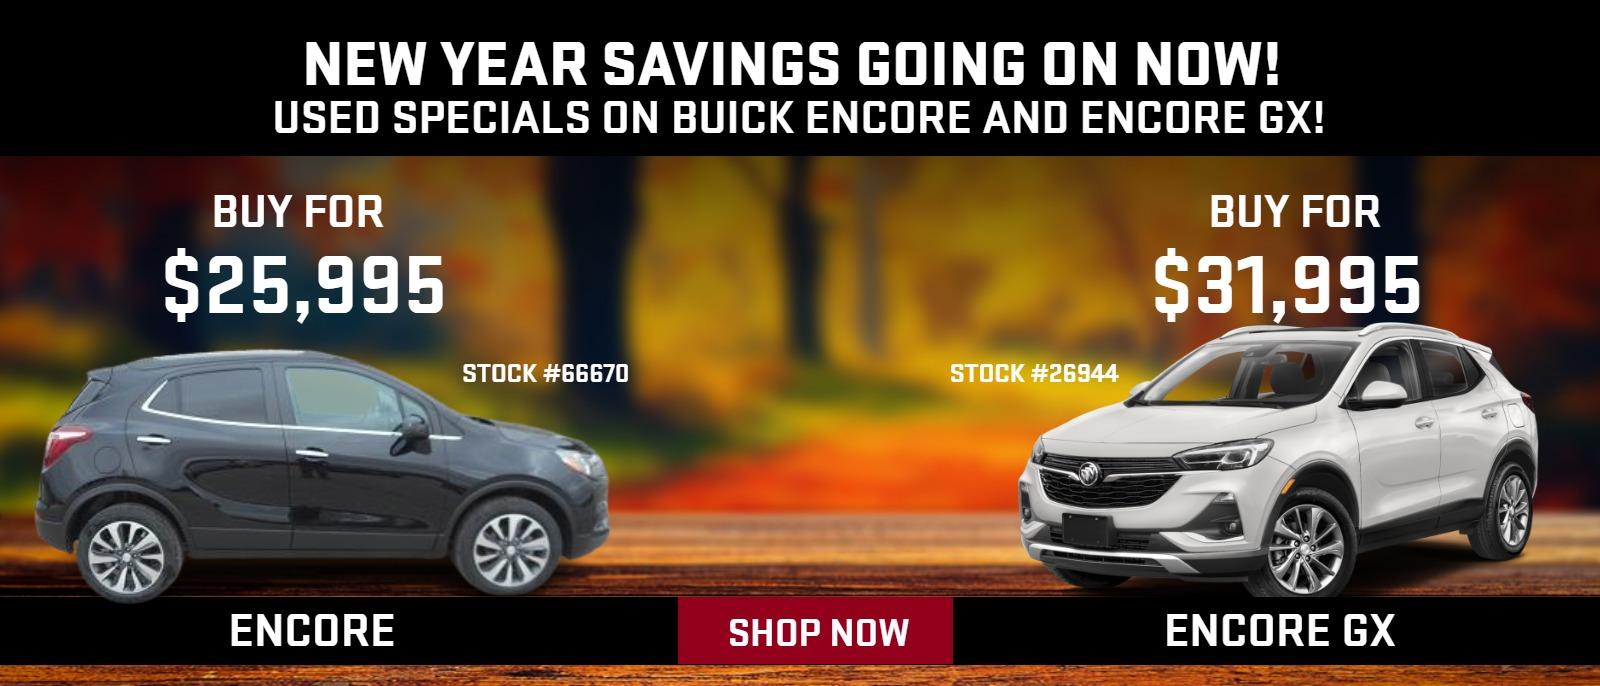 End of Summer Deals!
Used Specials on Buick Encore and Encore GX just in!